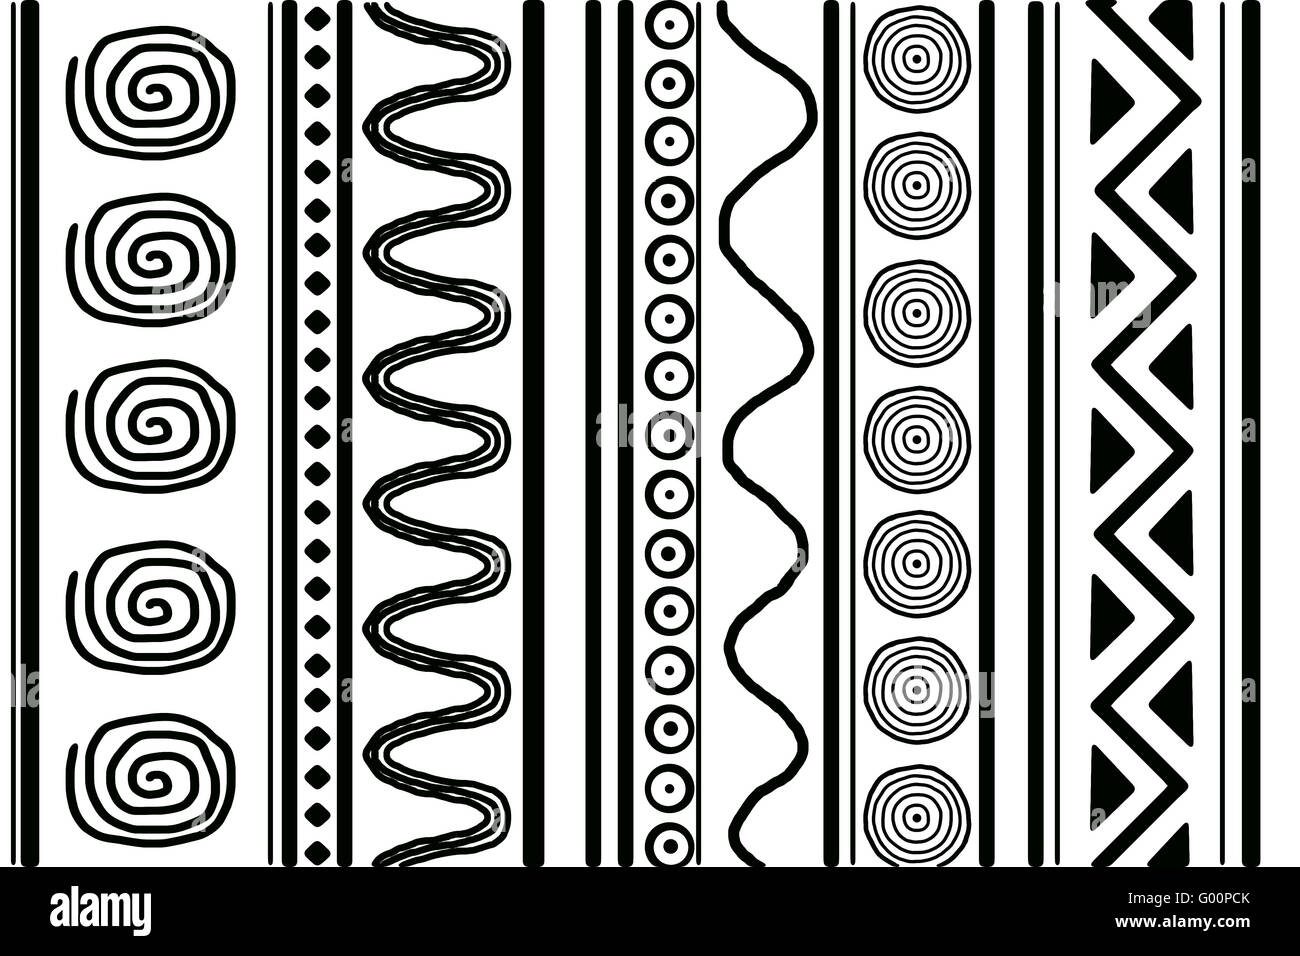 Featured image of post African Patterns Black And White : Royalty free images black art image african stock photos painting art photo drawings.